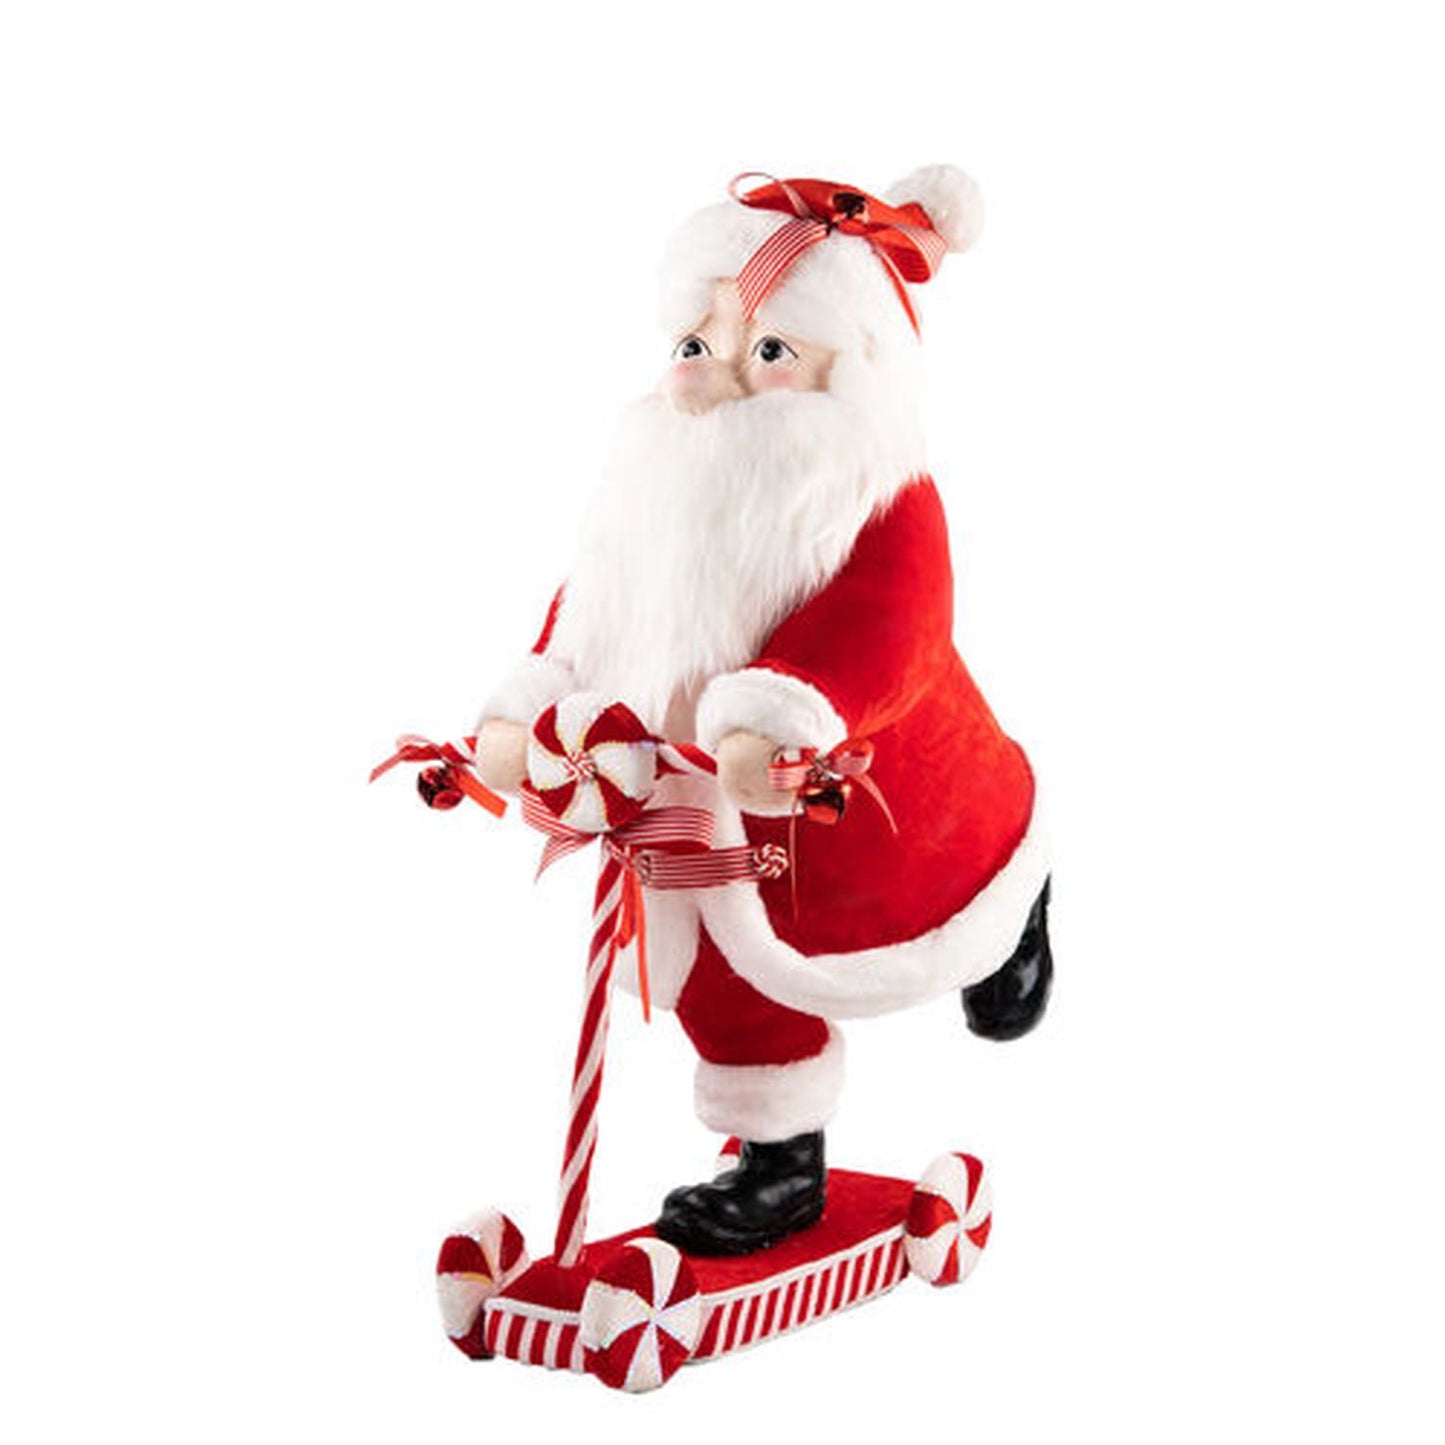 December Diamonds Candy Cane Lace 33" Red Candy Cane Santa On Scooter Figurine